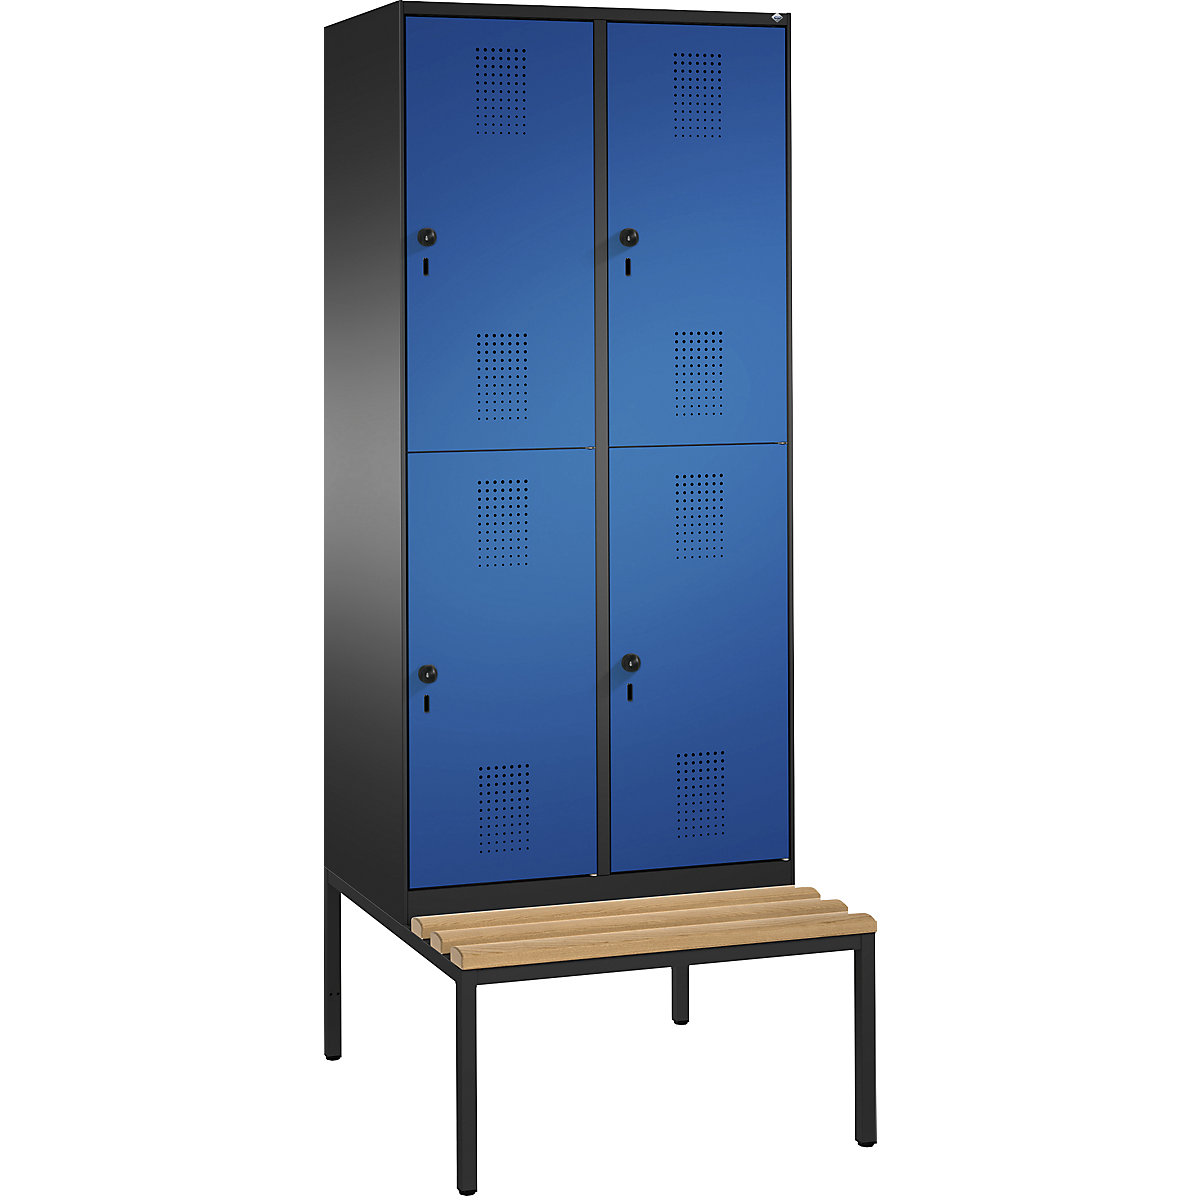 EVOLO cloakroom locker, double tier, with bench – C+P, 2 compartments, 2 shelf compartments each, compartment width 400 mm, black grey / gentian blue-13